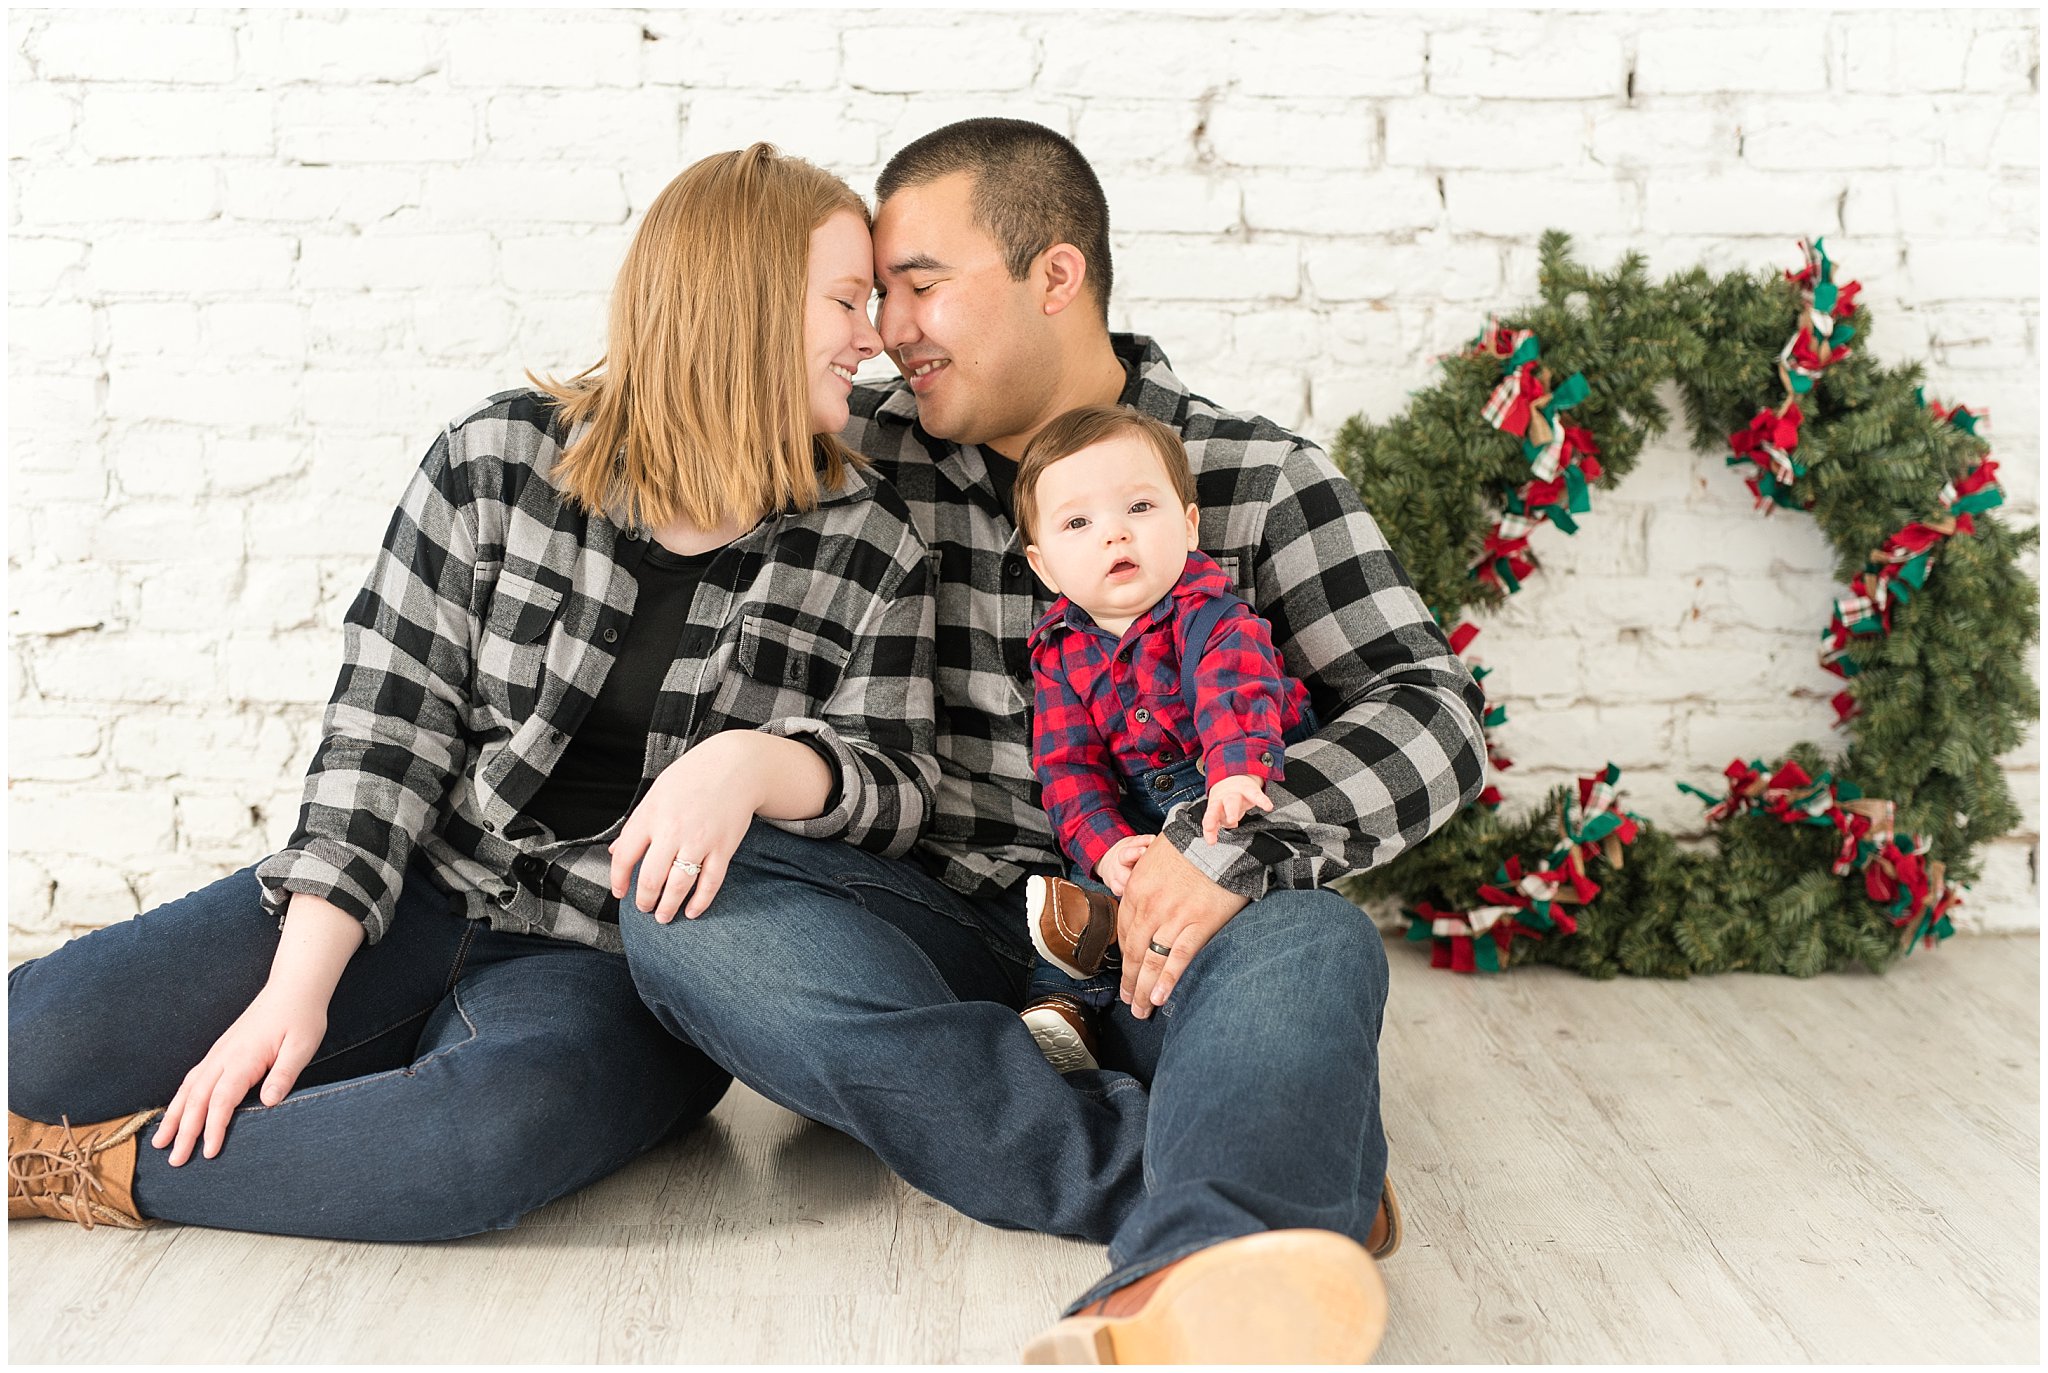 Parents nose to nose and holding baby boy in their arms with wreath behind them | Family Christmas session at the 5th floor | Utah Photographers | Jessie and Dallin Photography